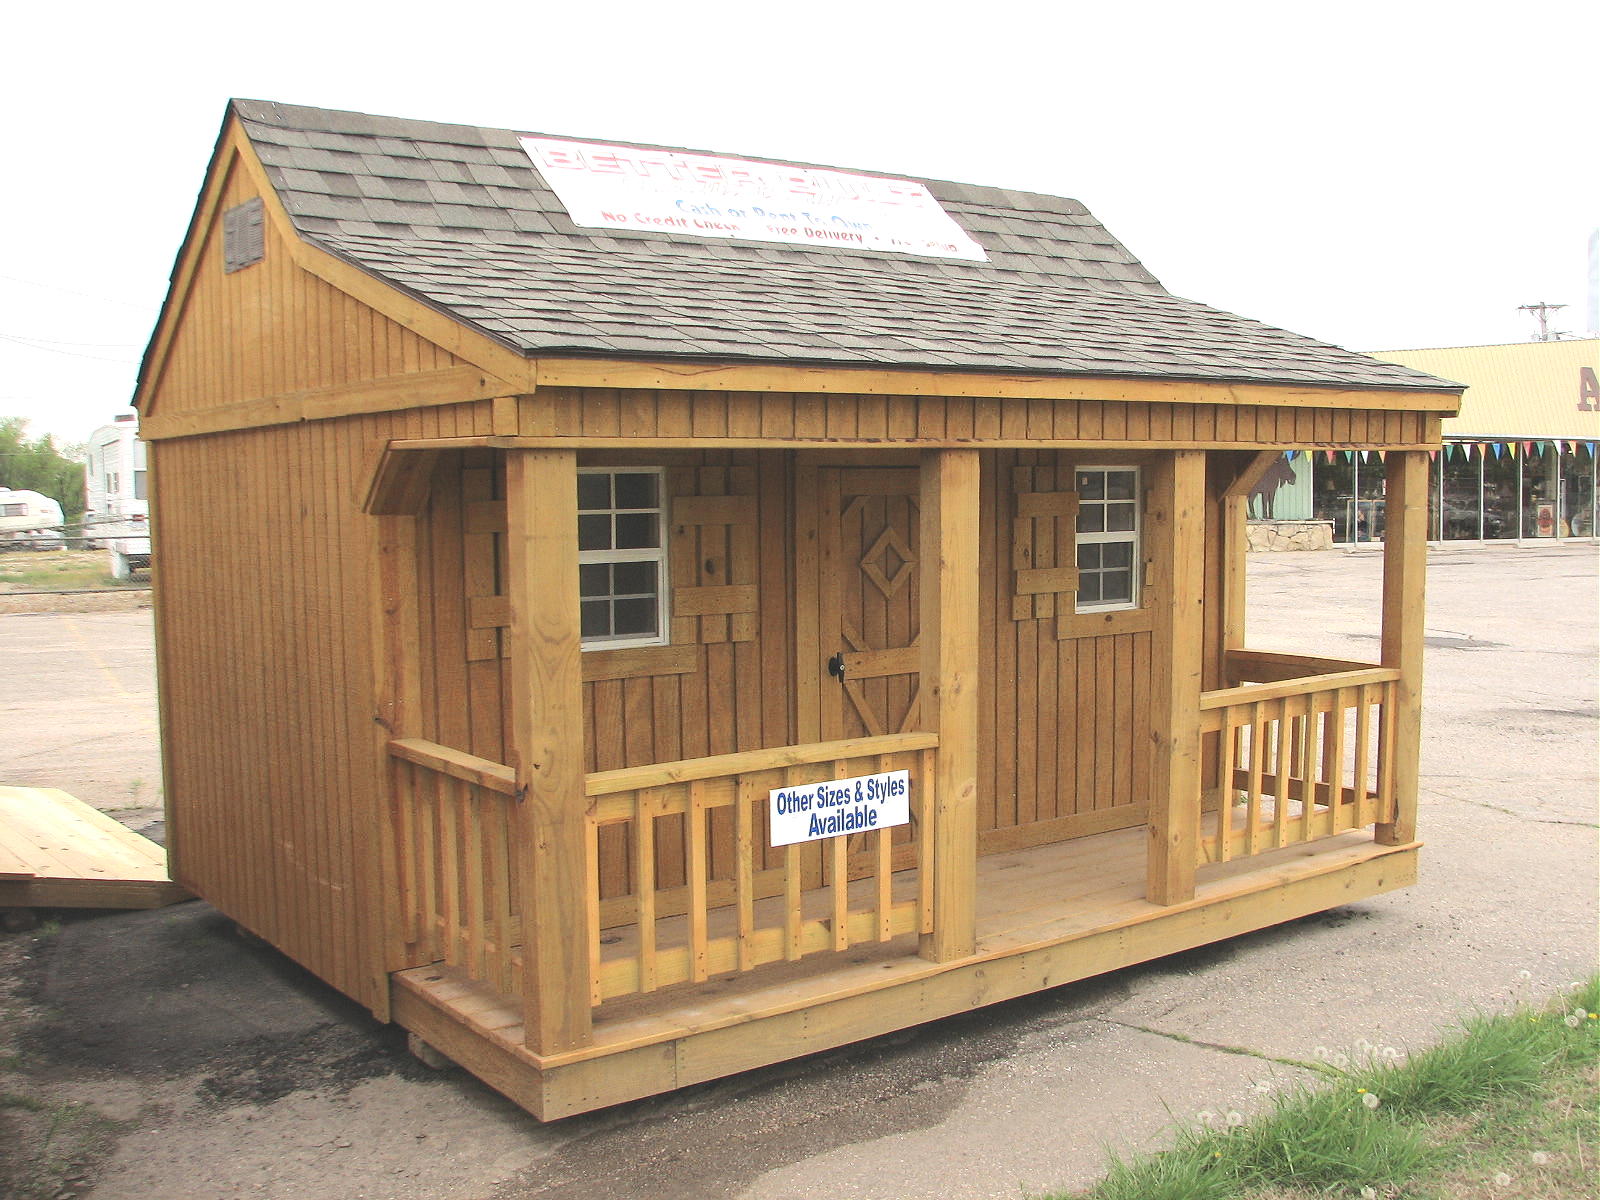 Free Shed Plans 2019: Home Depot Shed Playhouse